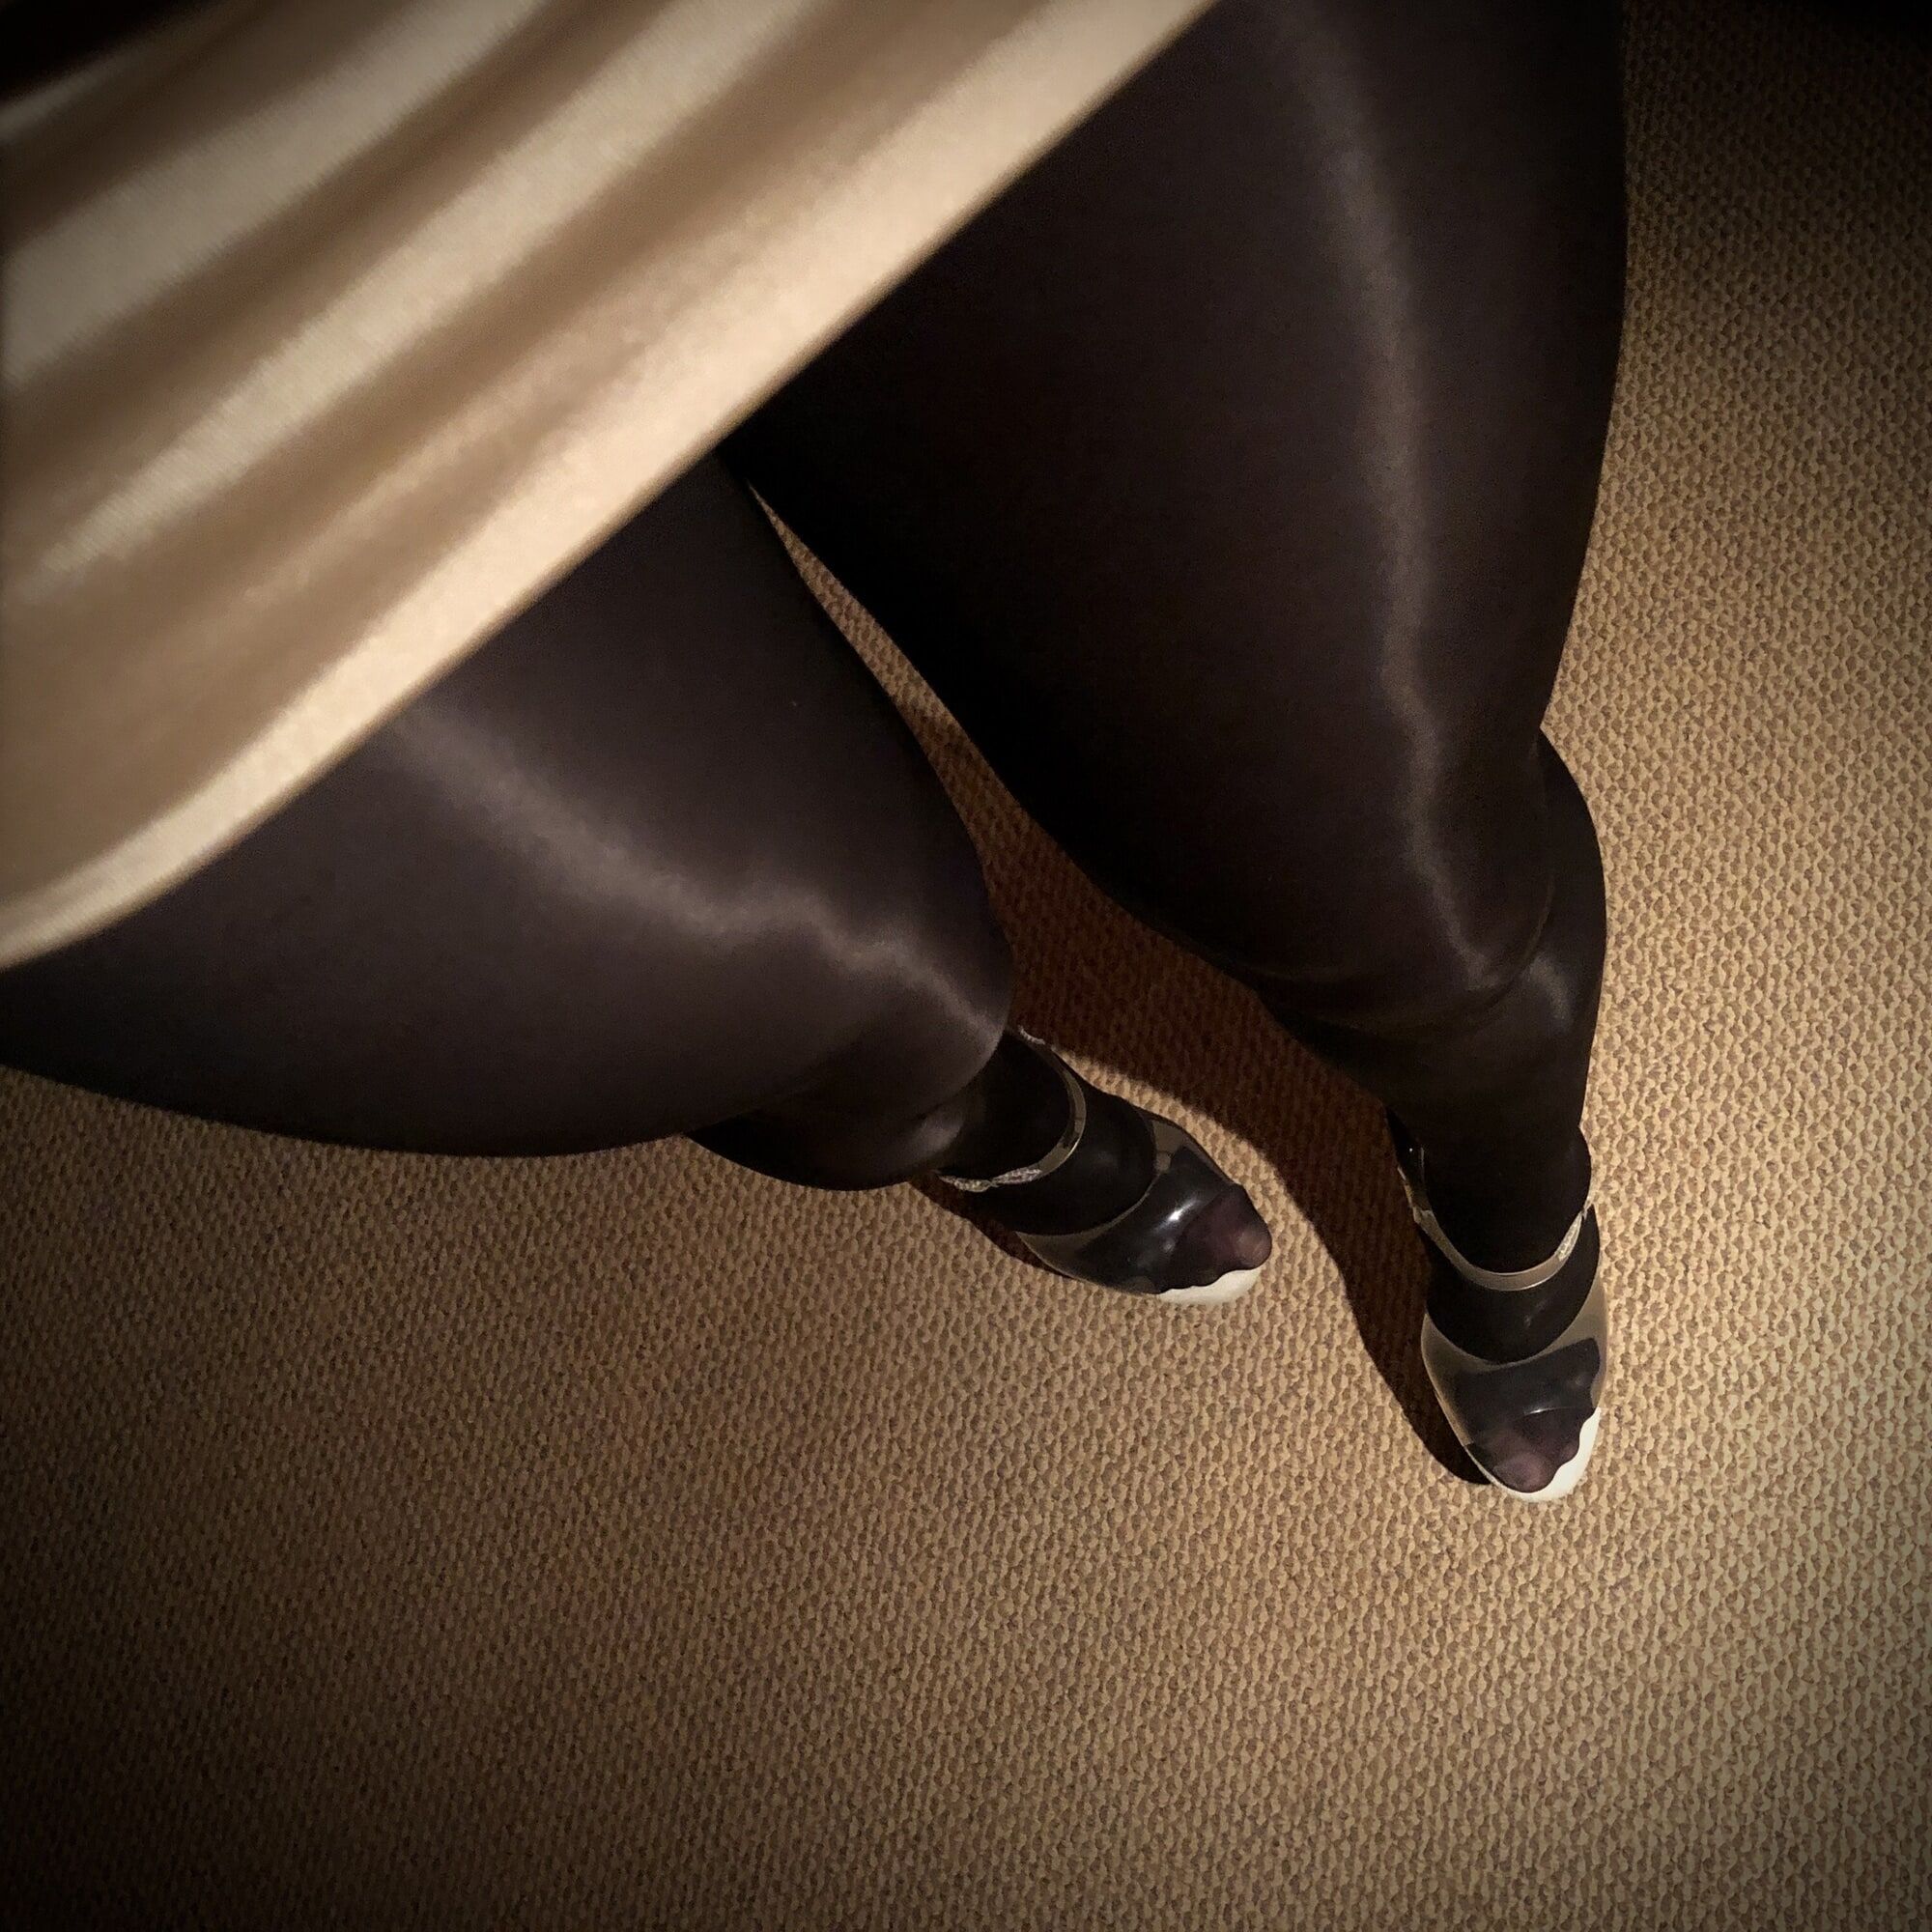 My legs looks so hot on pantyhose and high heels! #12